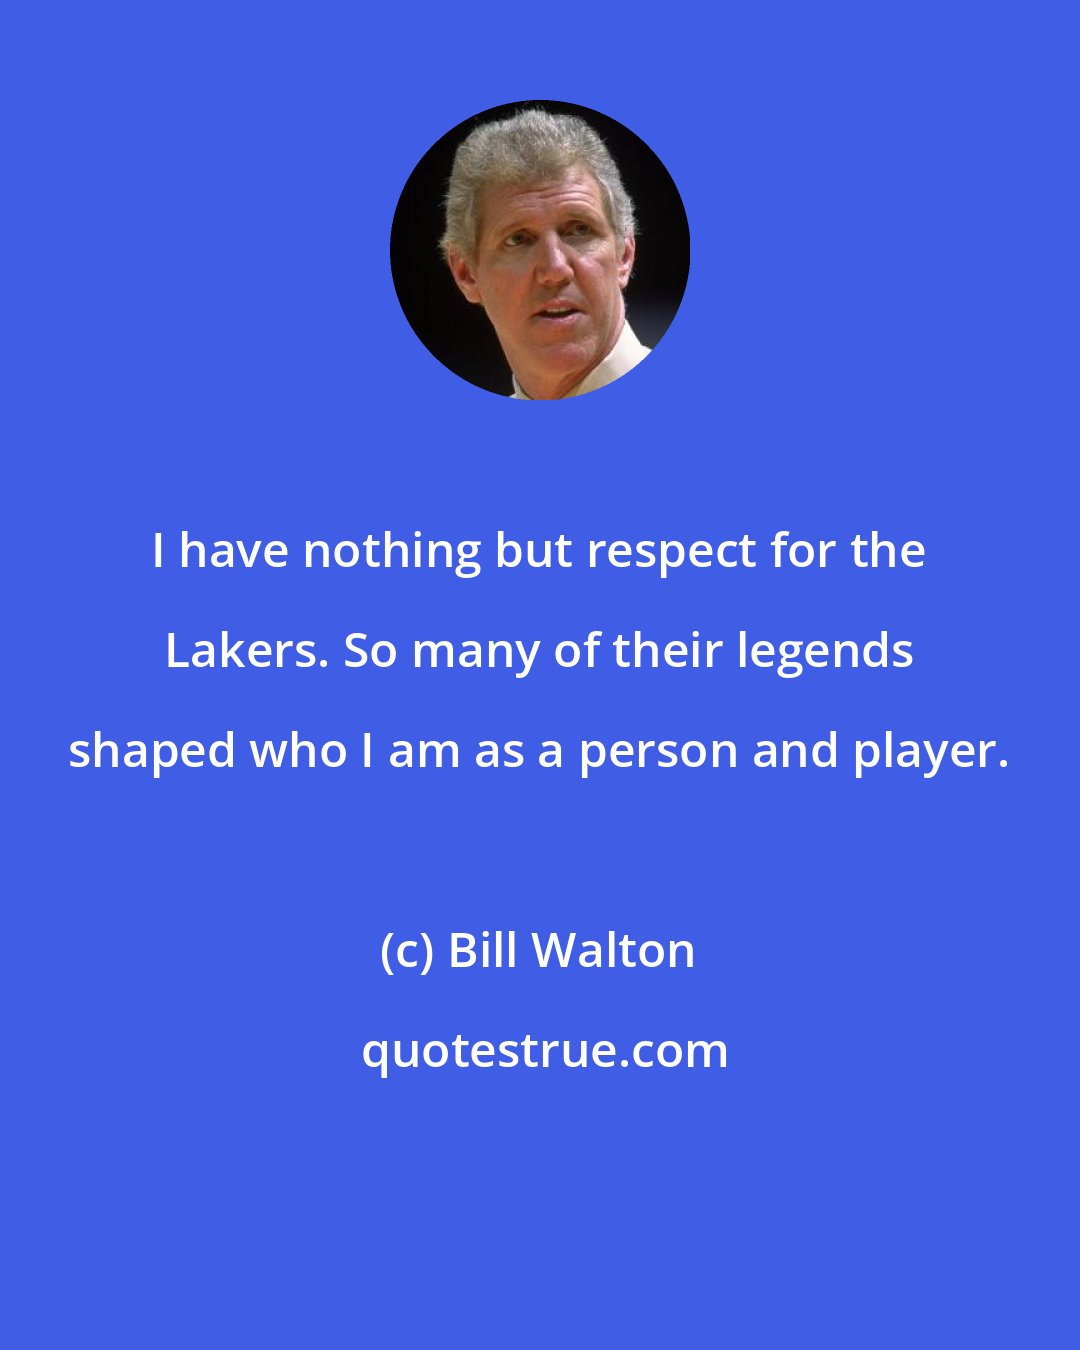 Bill Walton: I have nothing but respect for the Lakers. So many of their legends shaped who I am as a person and player.